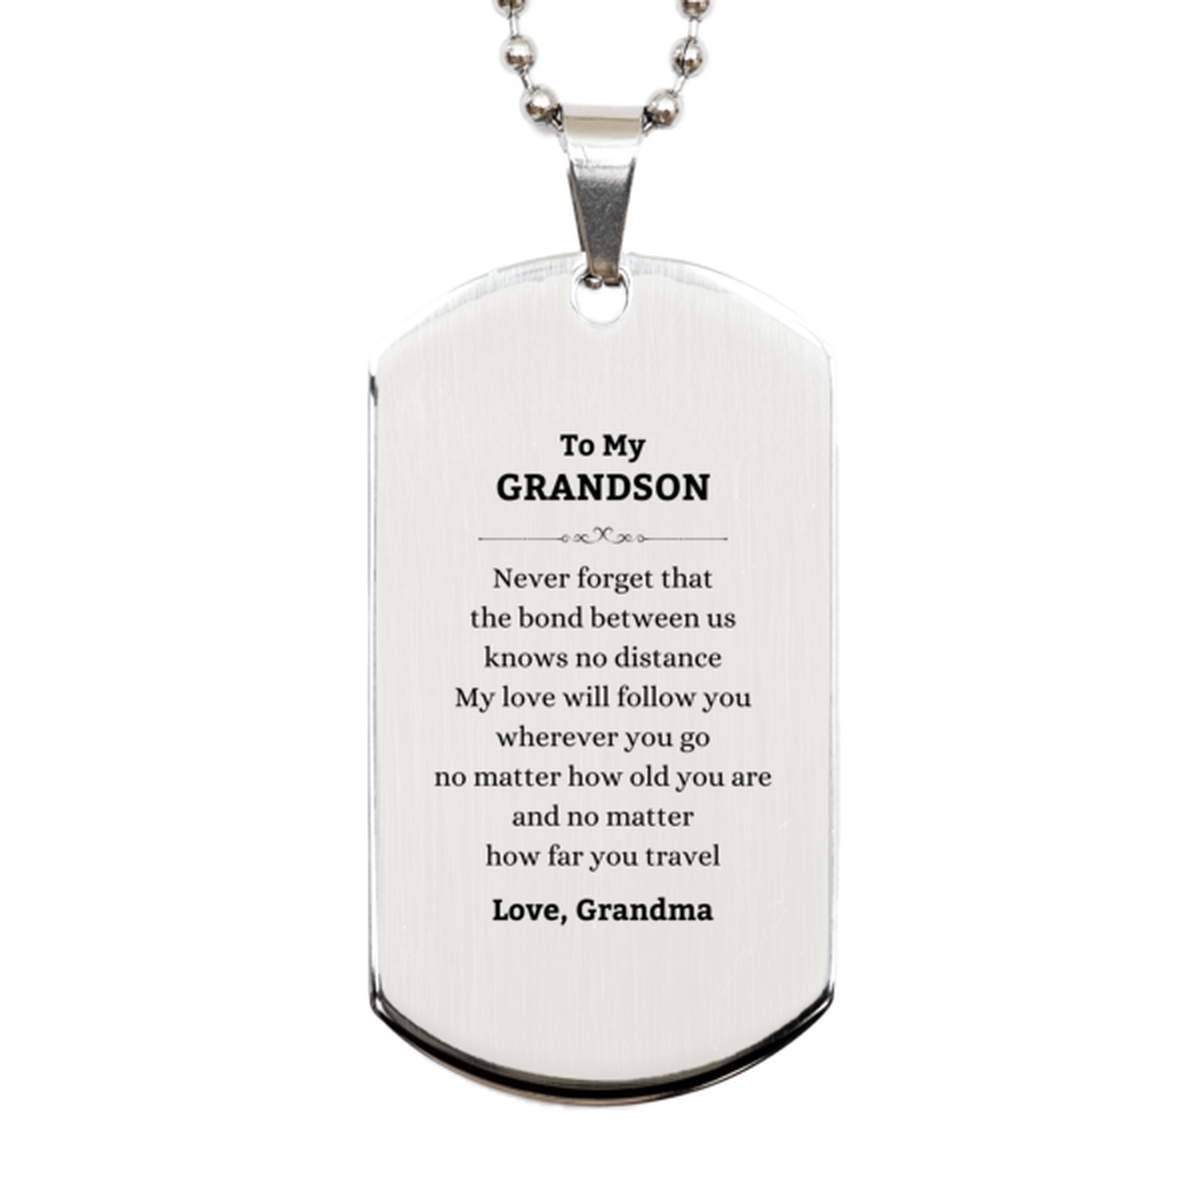 Grandson Birthday Gifts from Grandma, Adjustable Silver Dog Tag for Grandson Christmas Graduation Unique Gifts Grandson Never forget that the bond between us knows no distance. Love, Grandma